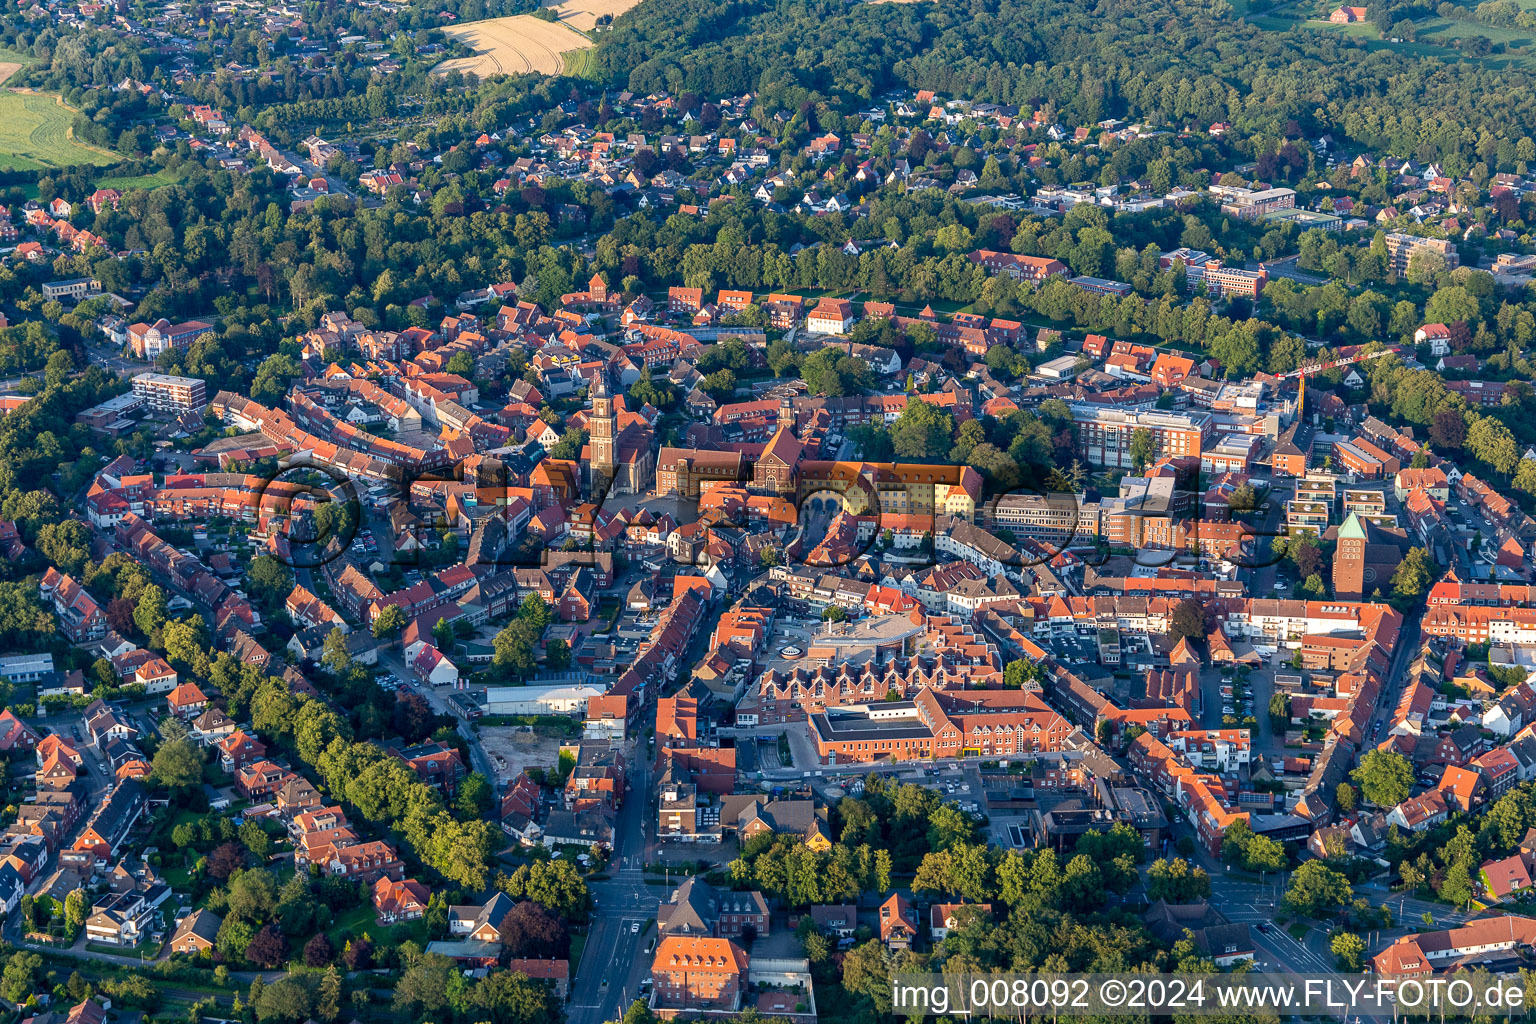 Town View of the streets and houses of the residential areas in Coesfeld in the state North Rhine-Westphalia, Germany